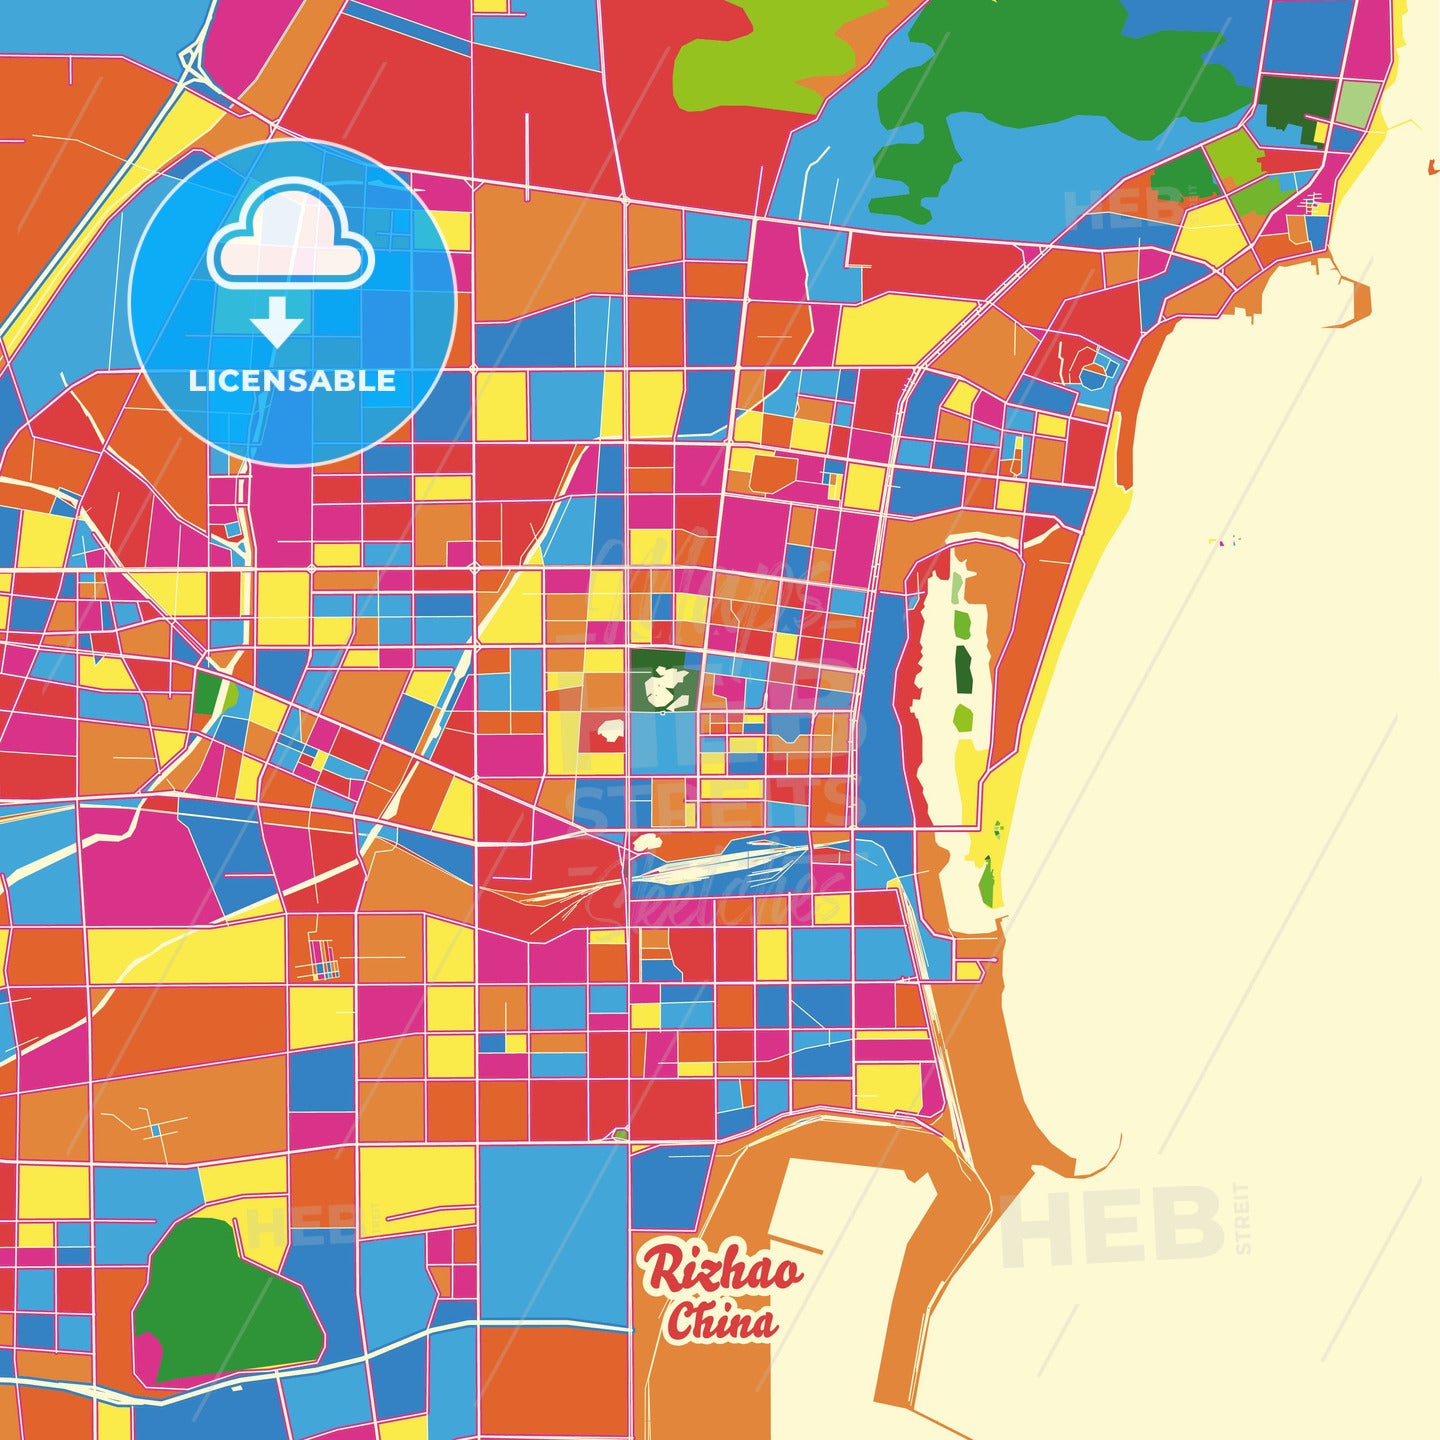 Rizhao, China Crazy Colorful Street Map Poster Template - HEBSTREITS Sketches